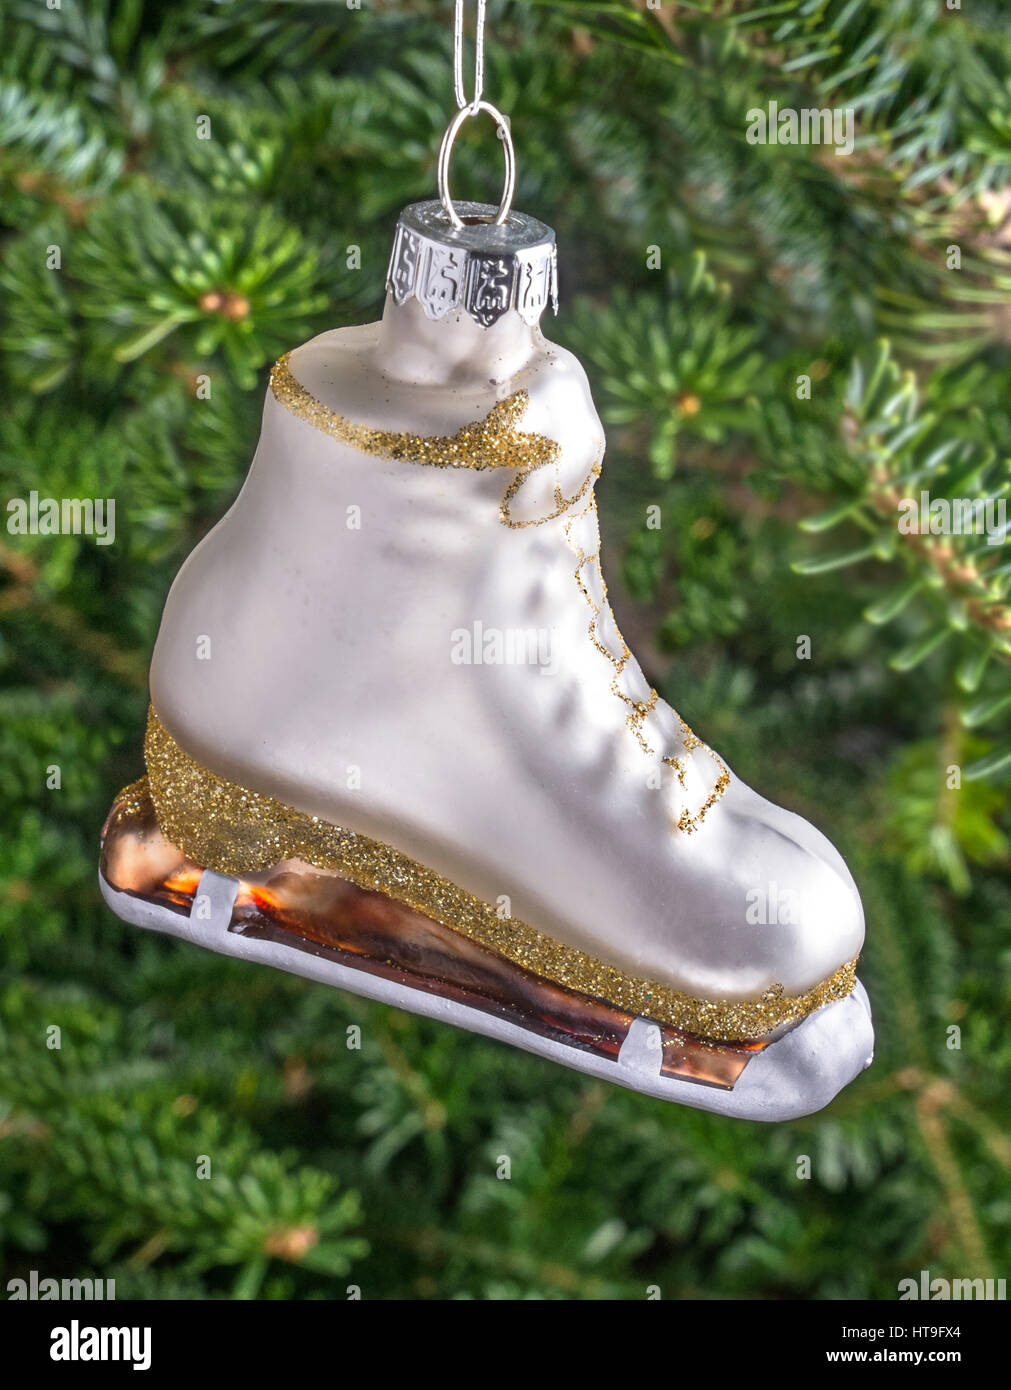 Christmas bauble hanging from a tree in the shape of a White Ice Skating Boot Stock Photo